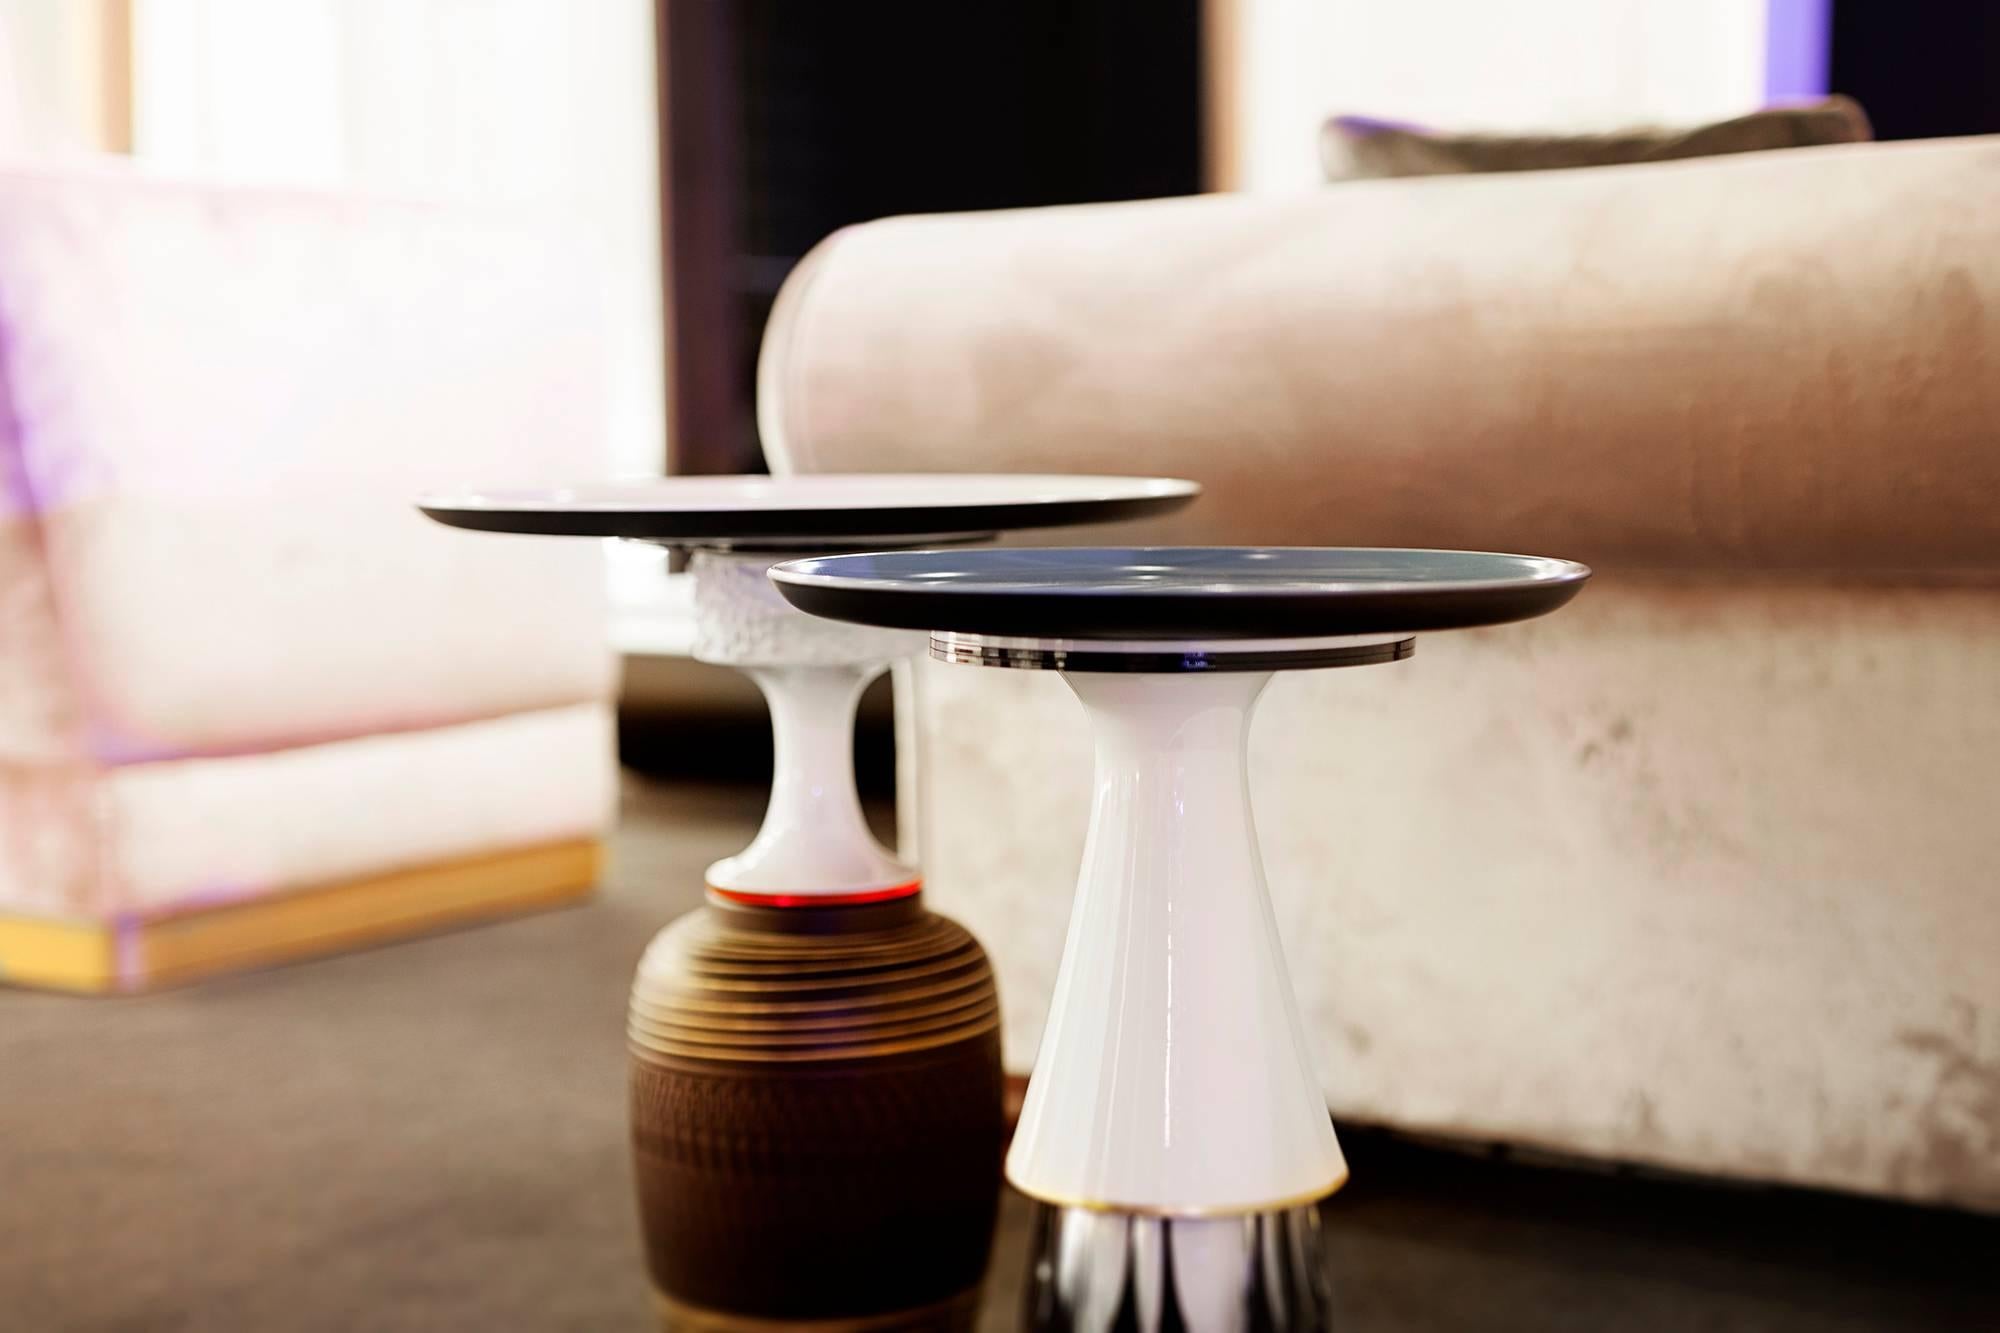 Mid-Century Modern 'Daddy' side table (vintage ceramics and glass) by Andreas Berlin